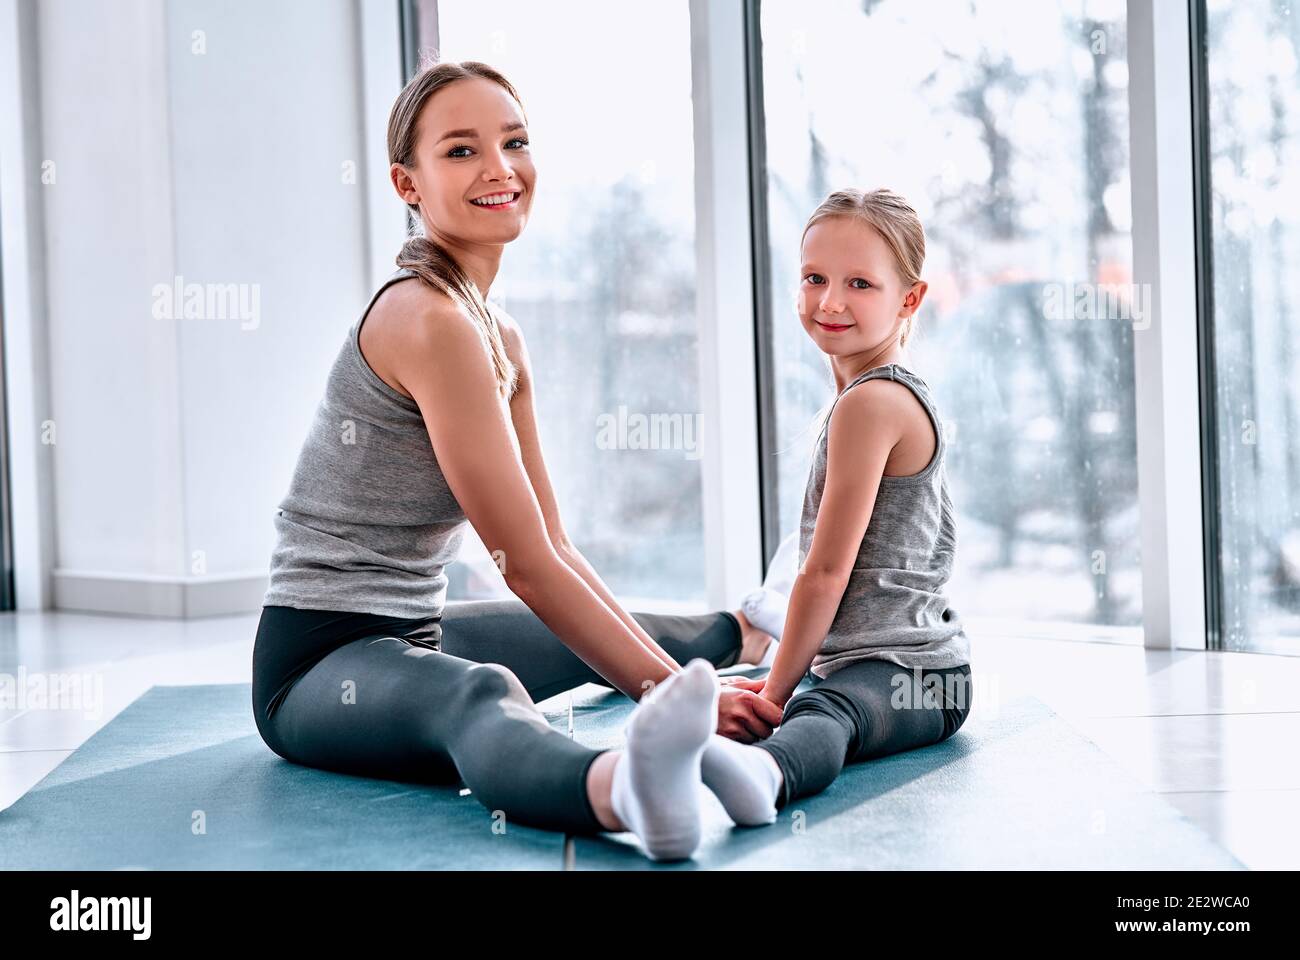 Little girl with yoga mat on white background Stock Photo - Alamy